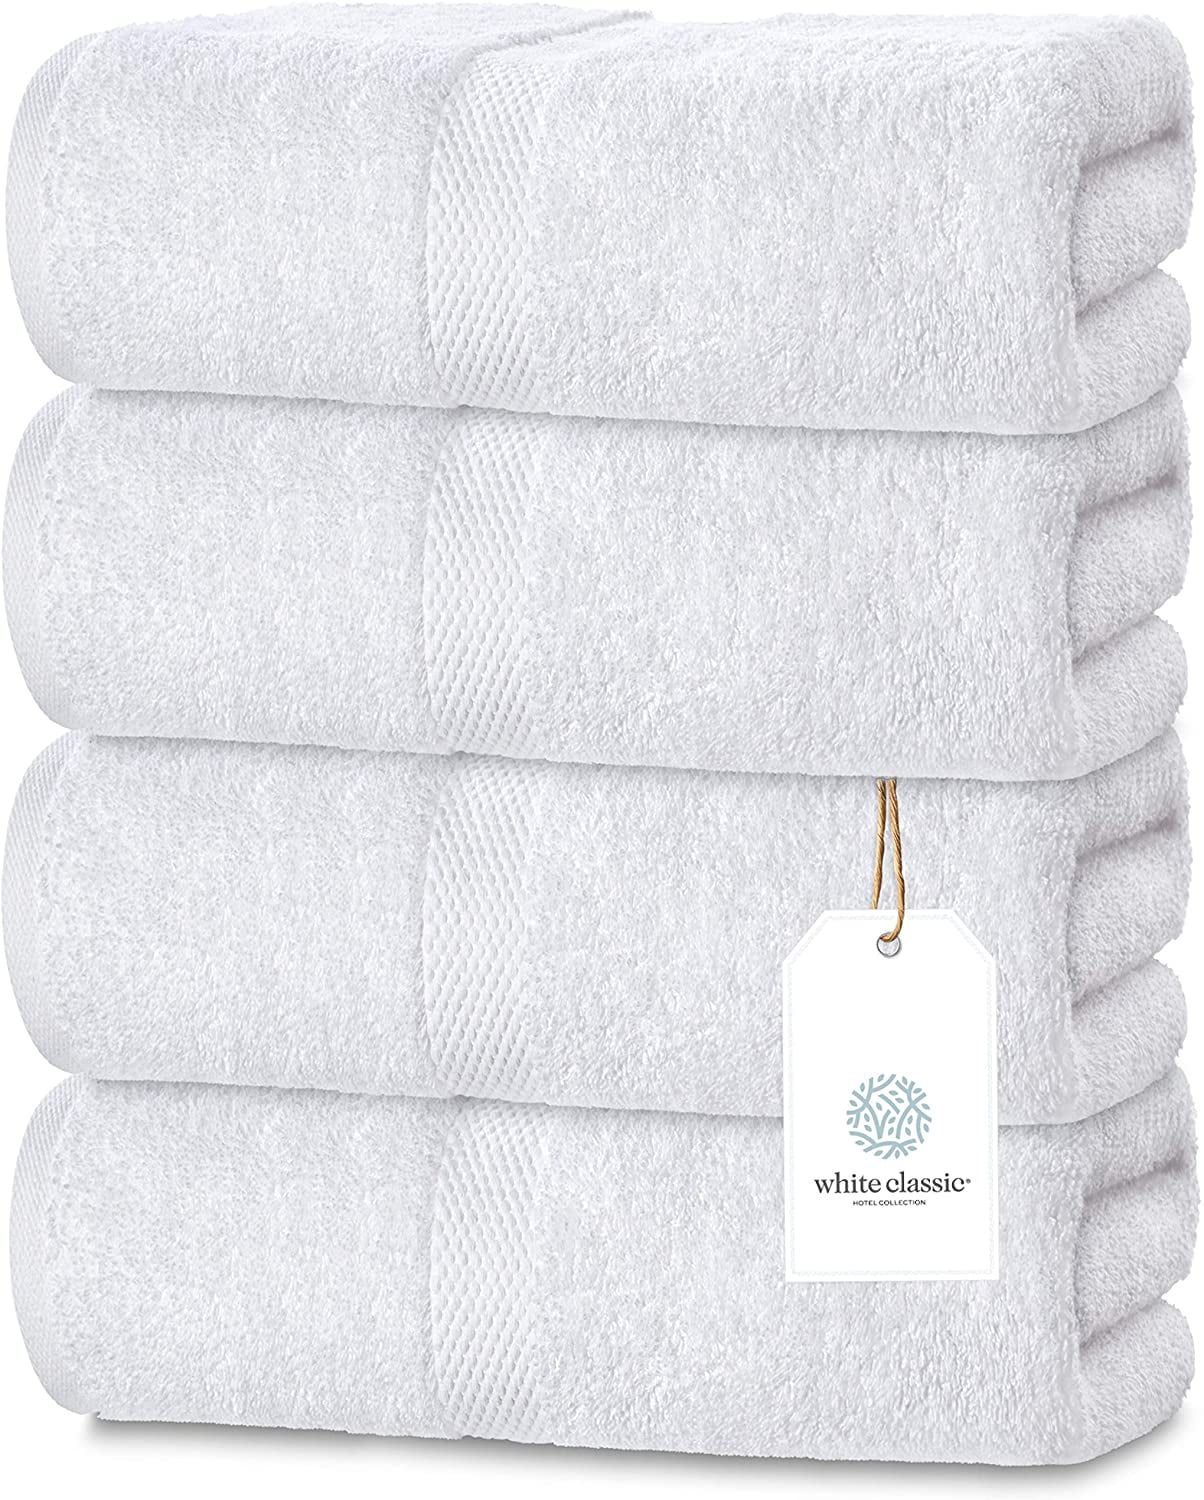 60 new pure white 24x48 deluxe brand soft bath towels absorbent hotel 